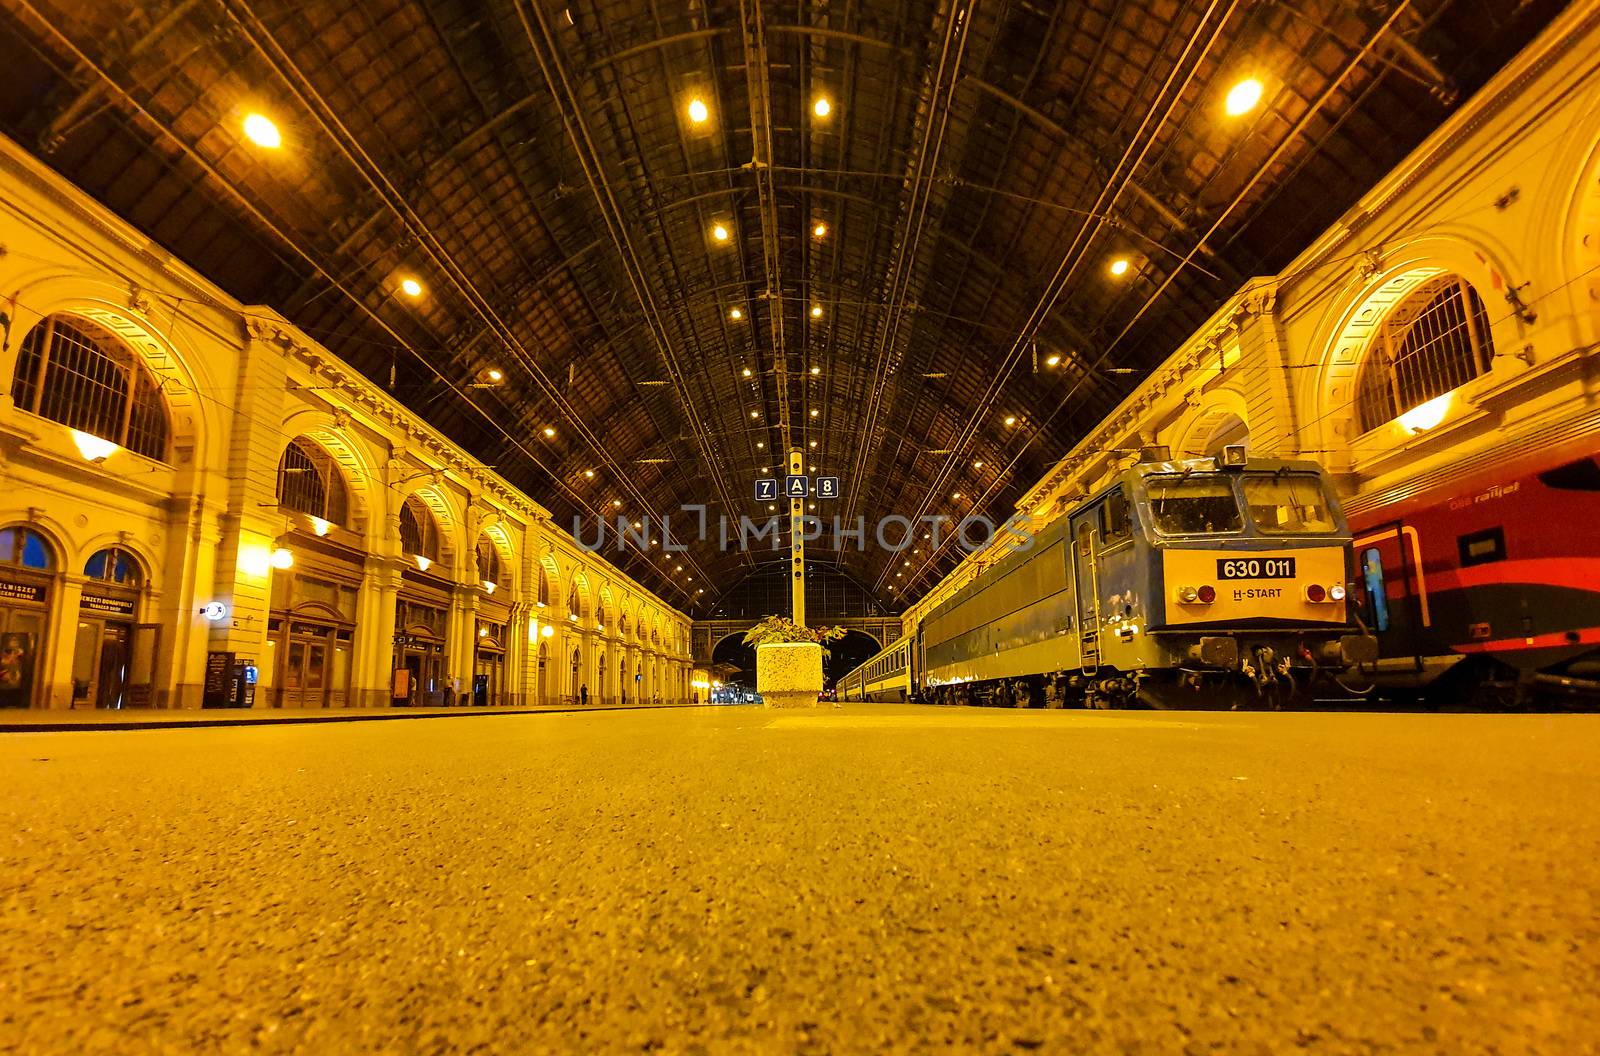 Ground view of the platforms at Keleti railway station in Budapest at night. Old trains at Keleti railway station in Budapest at night.